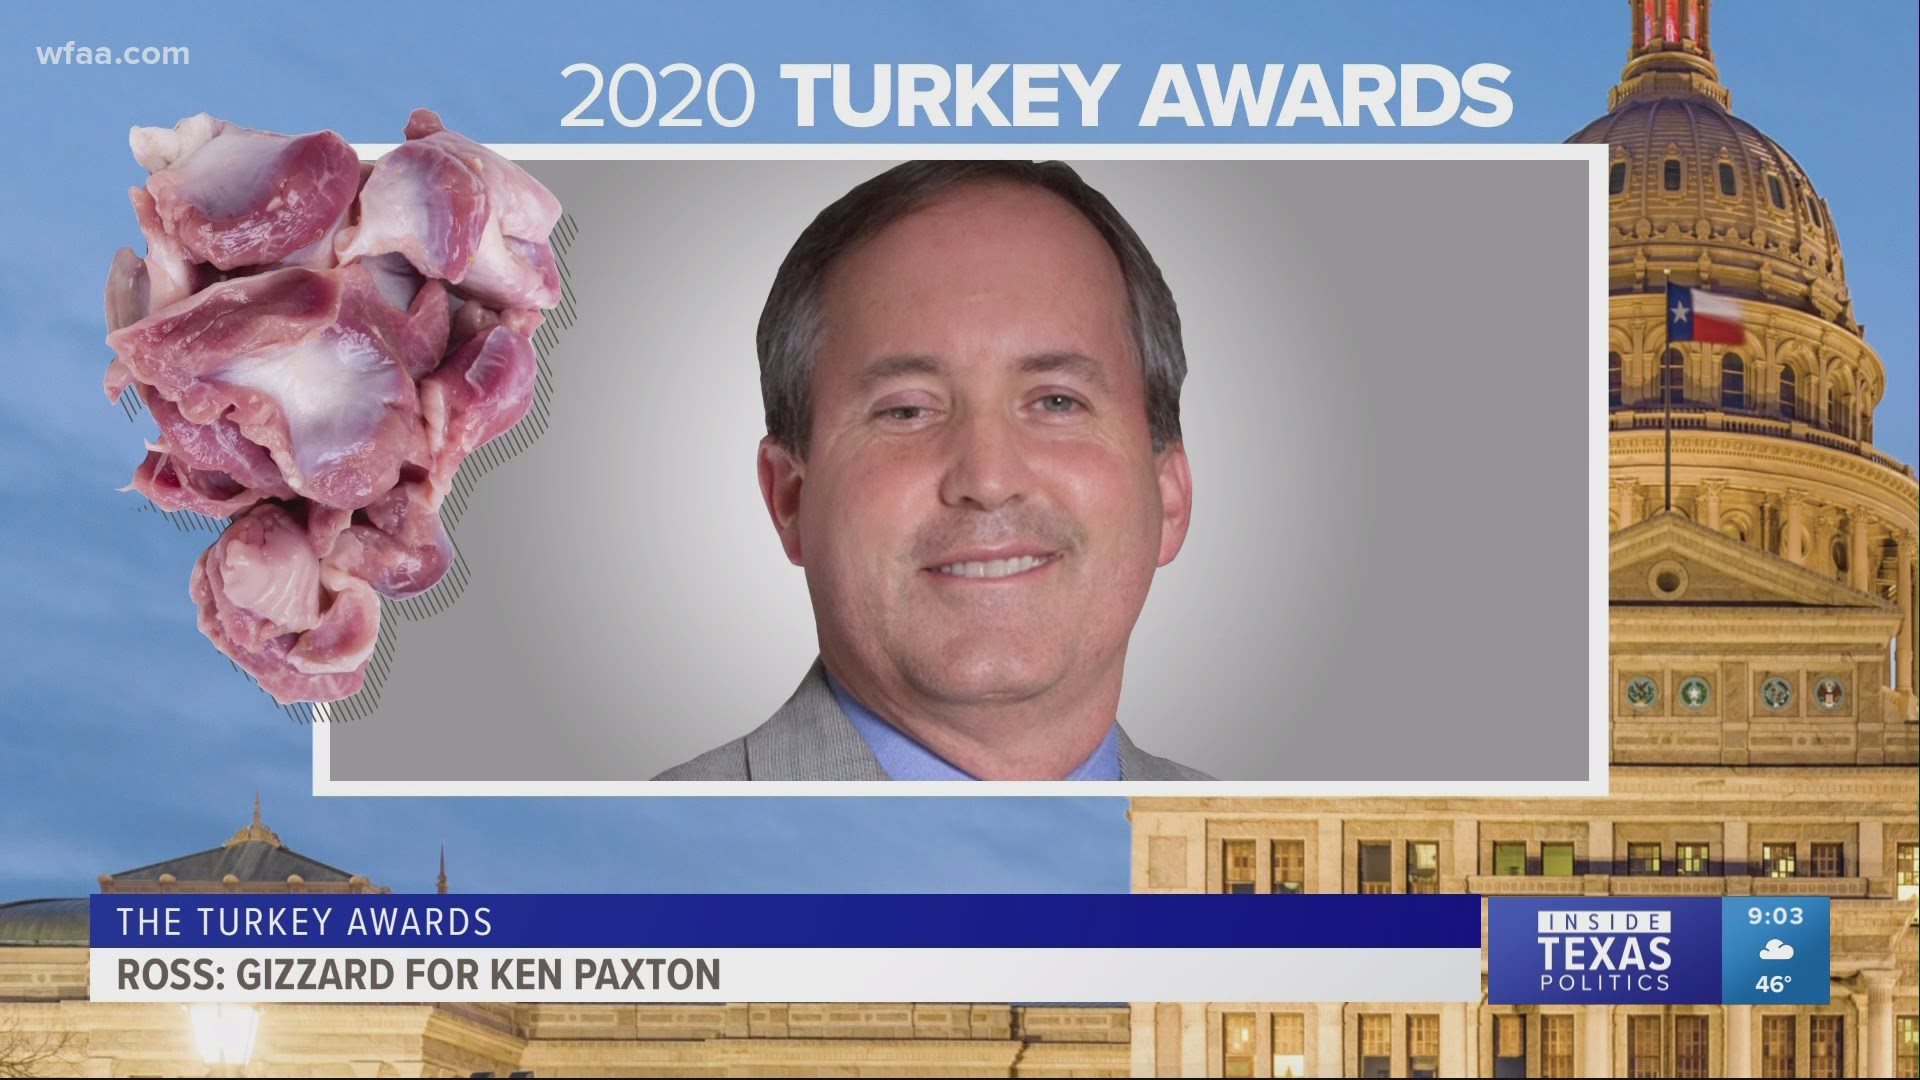 The panel awarded turkey legs and gizzards to political figures from Dallas County Judge Clay Jenkins to Texas Attorney General Ken Paxton.